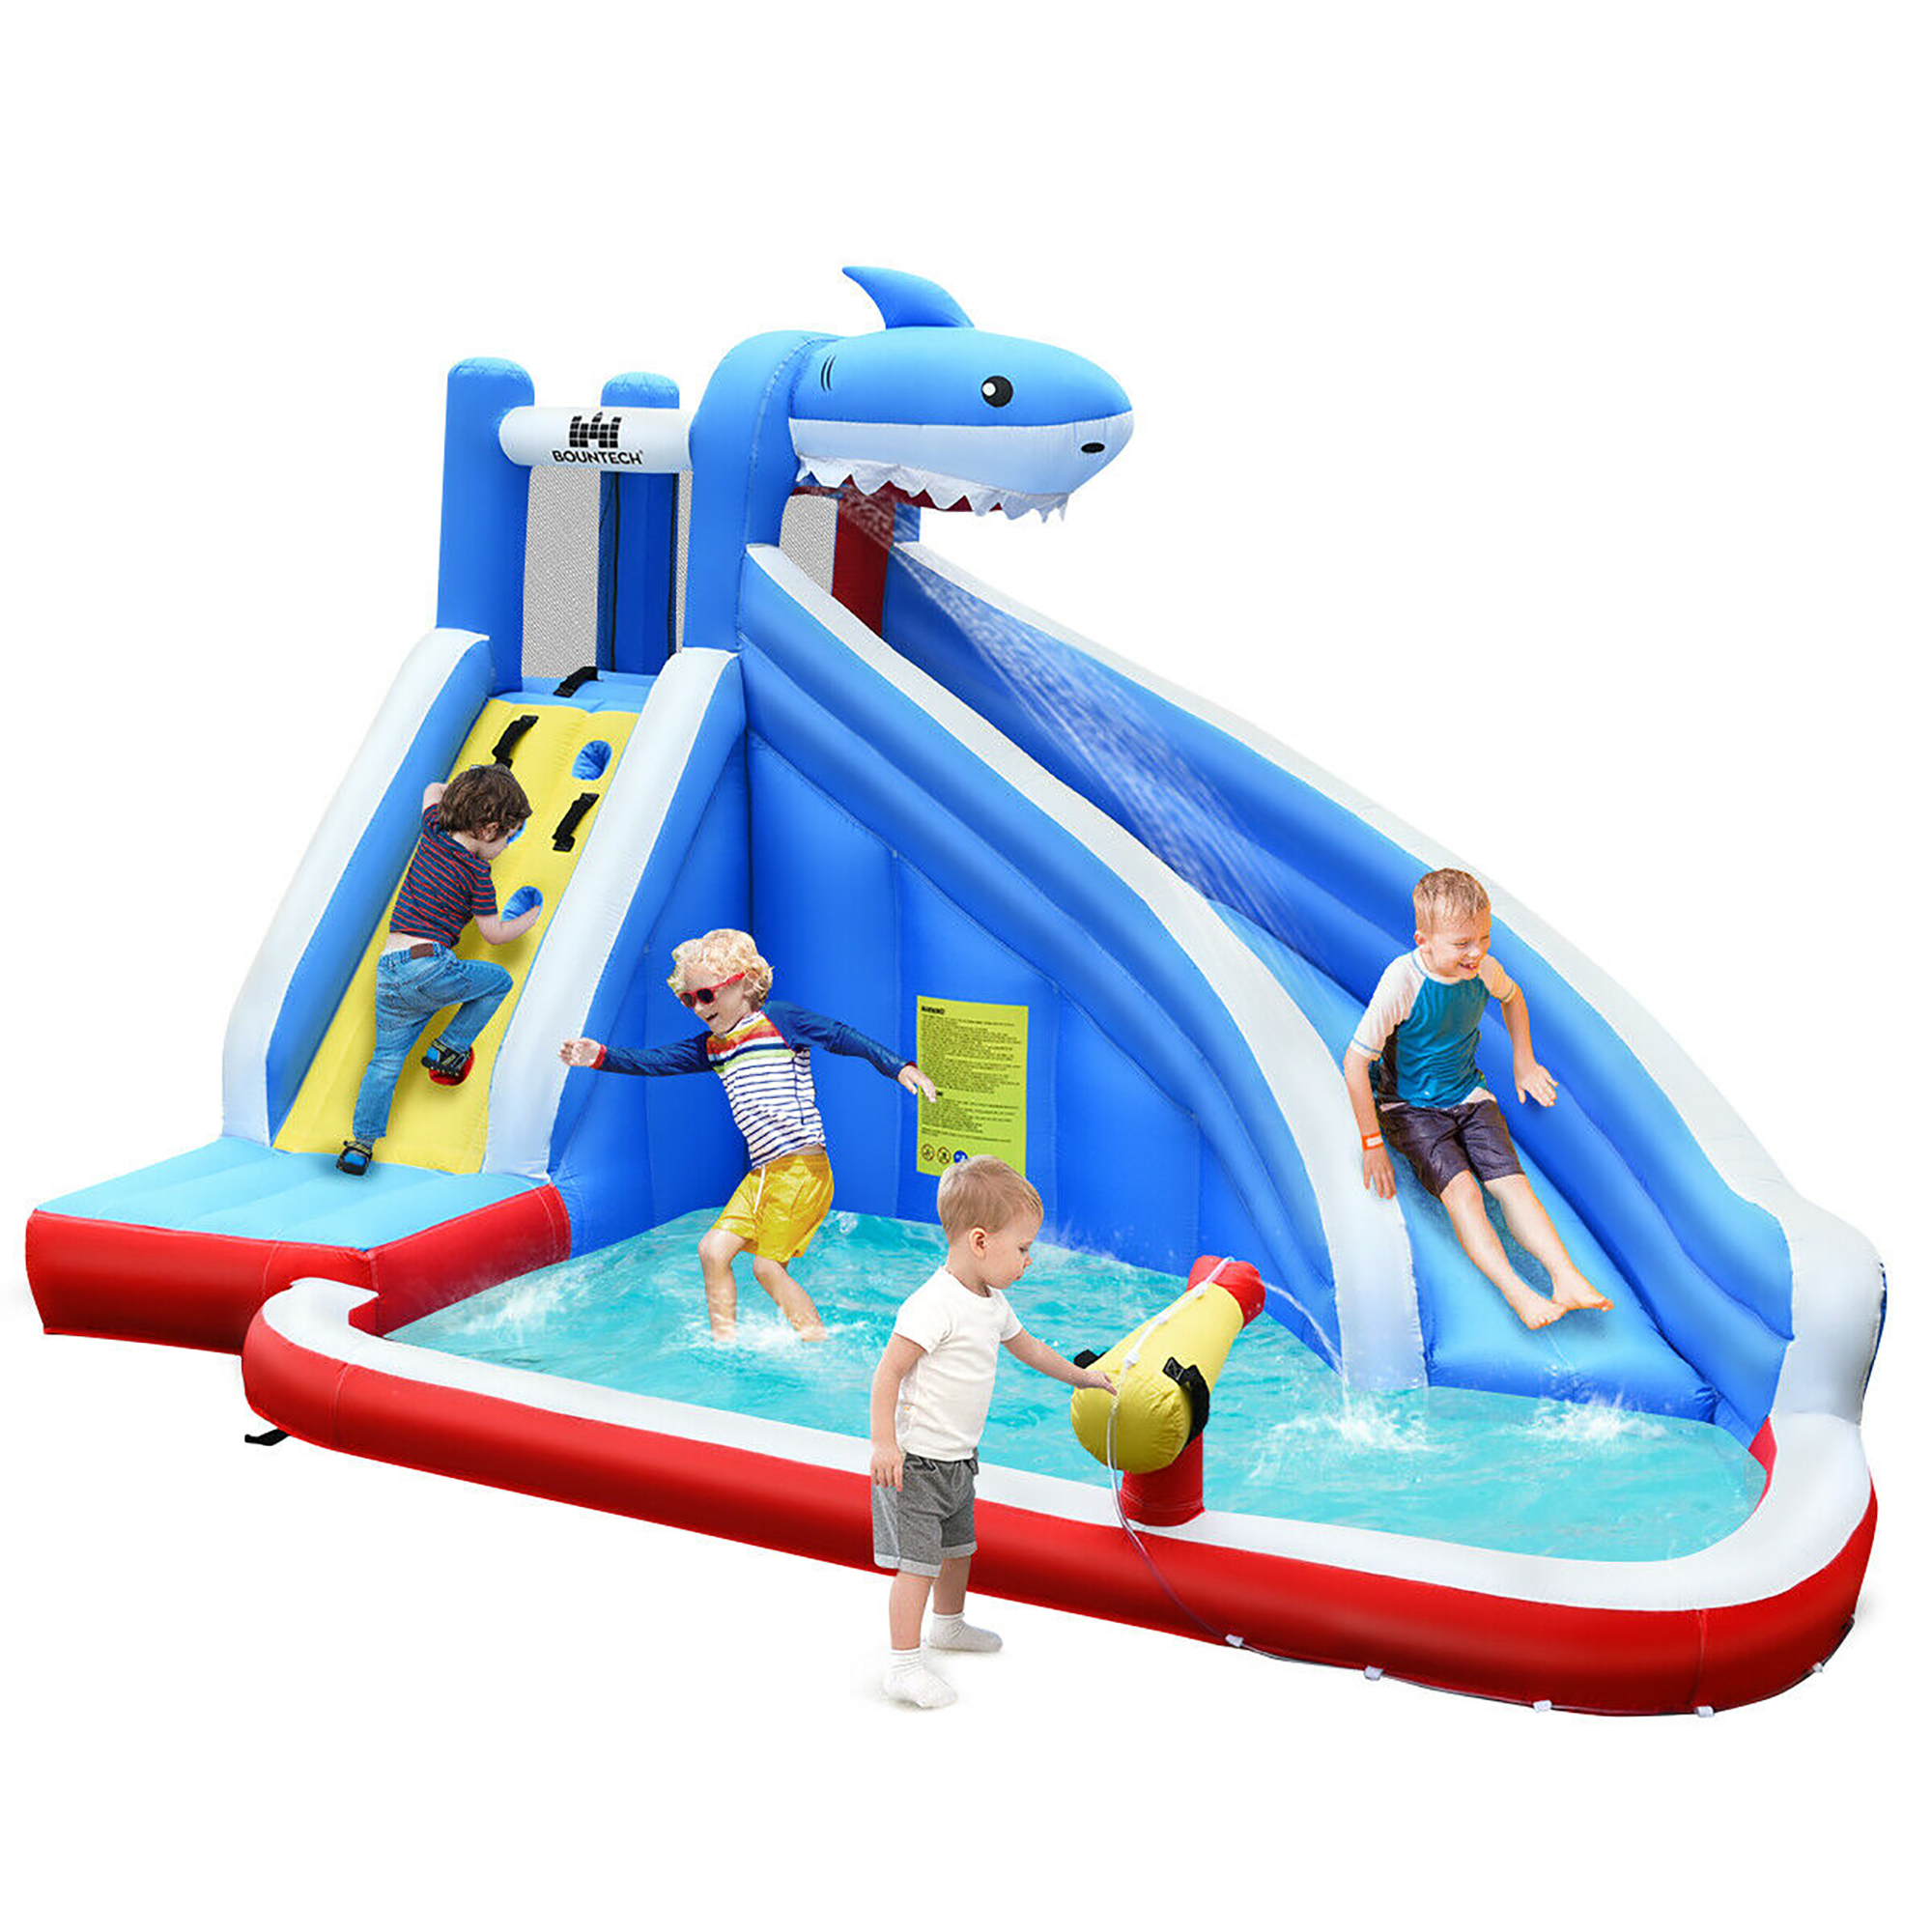 Costway Inflatable Water Slide Animal Shaped Bounce House Castle Splash Water Pool without Blower - image 1 of 10